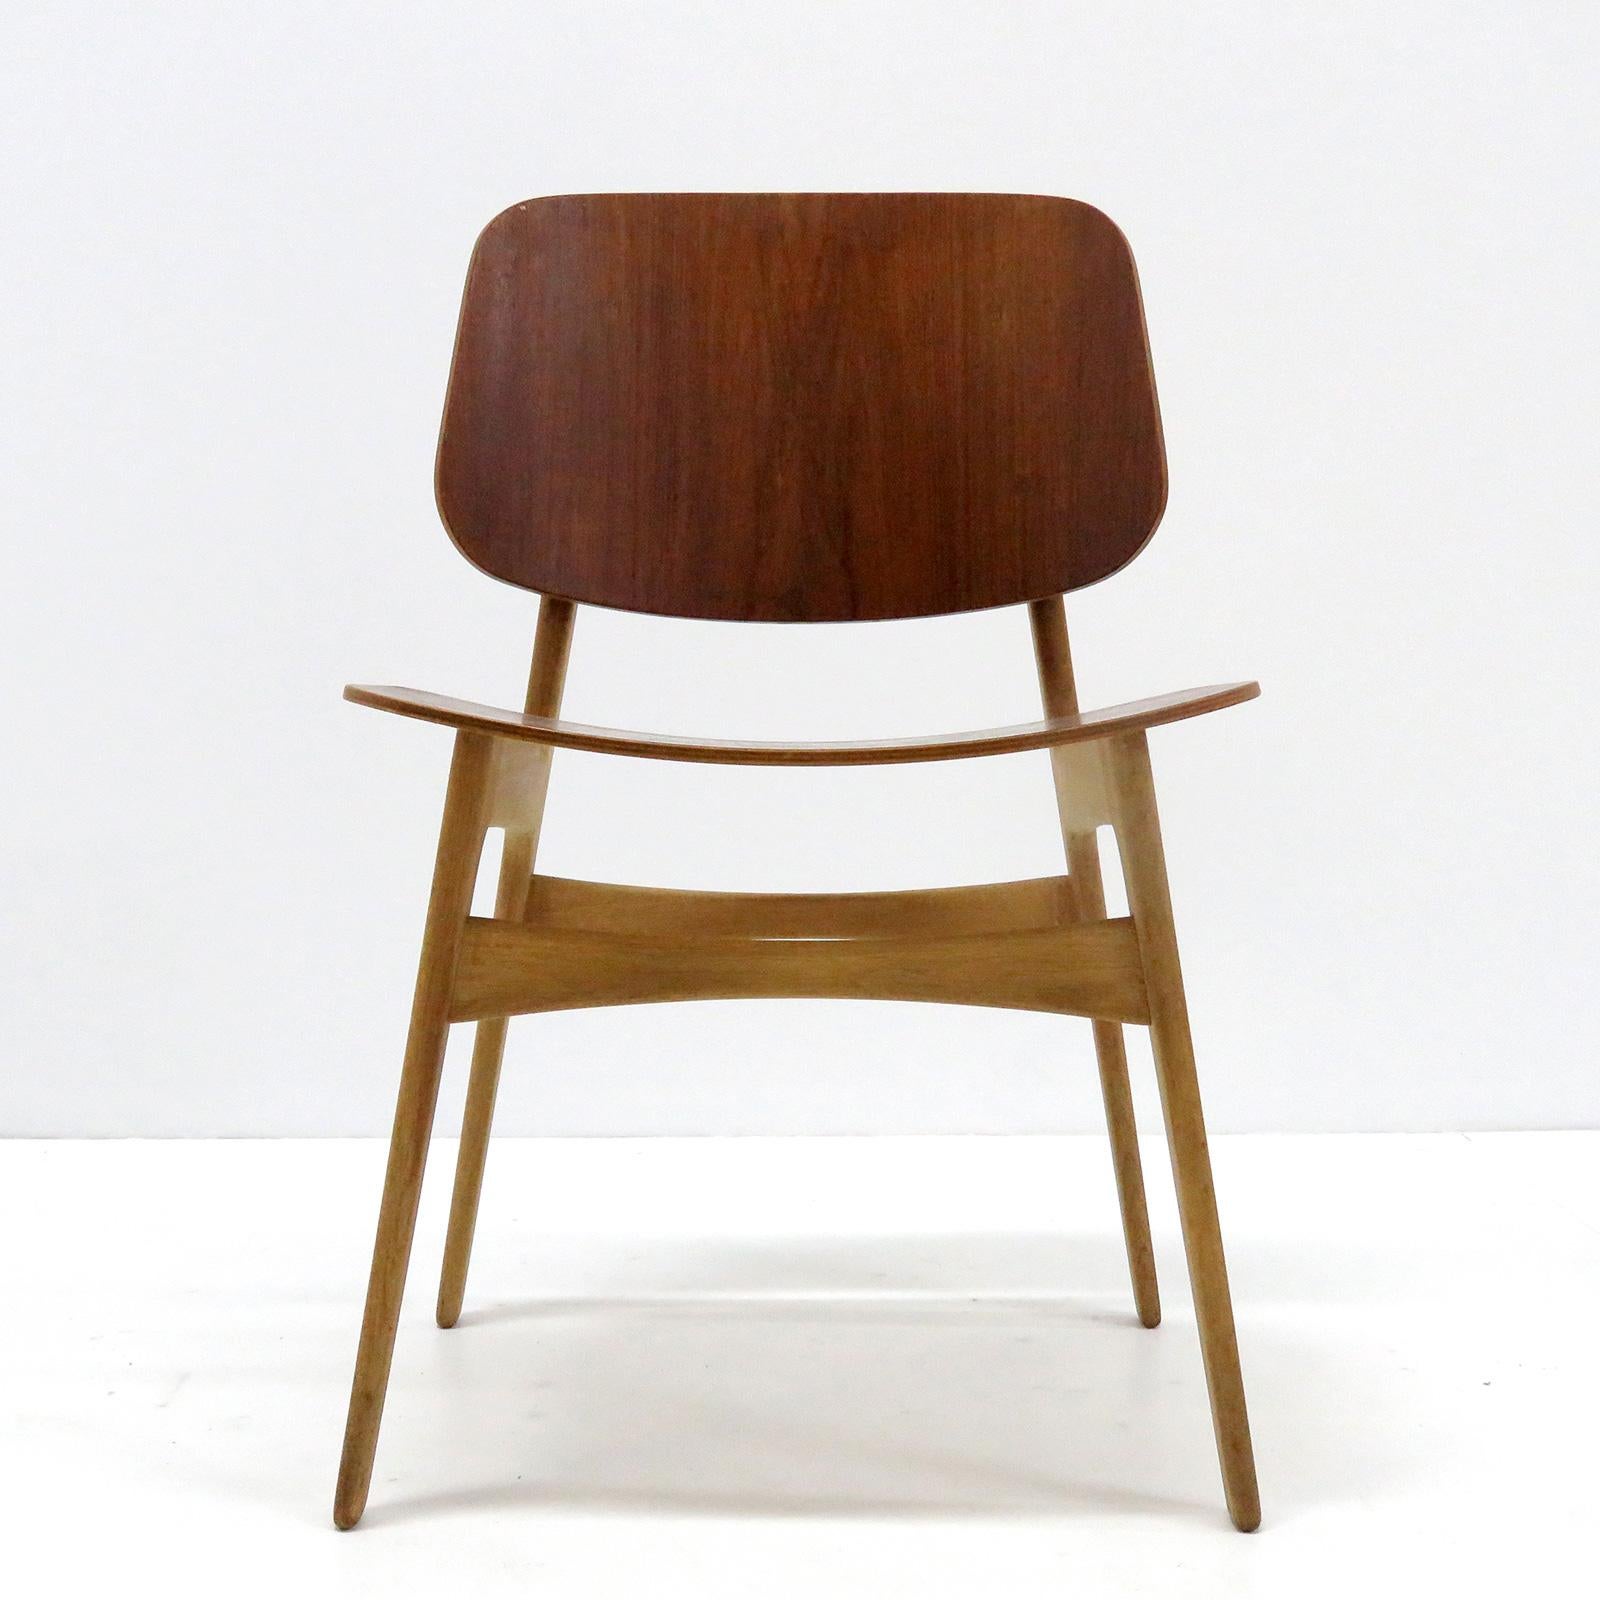 Wonderful set of 'Søborg' model 122 dining chairs by Børge Mogensen for Soborg Mobler with teak plywood shell seats and back rests on a beech wood frame in wonderful condition.